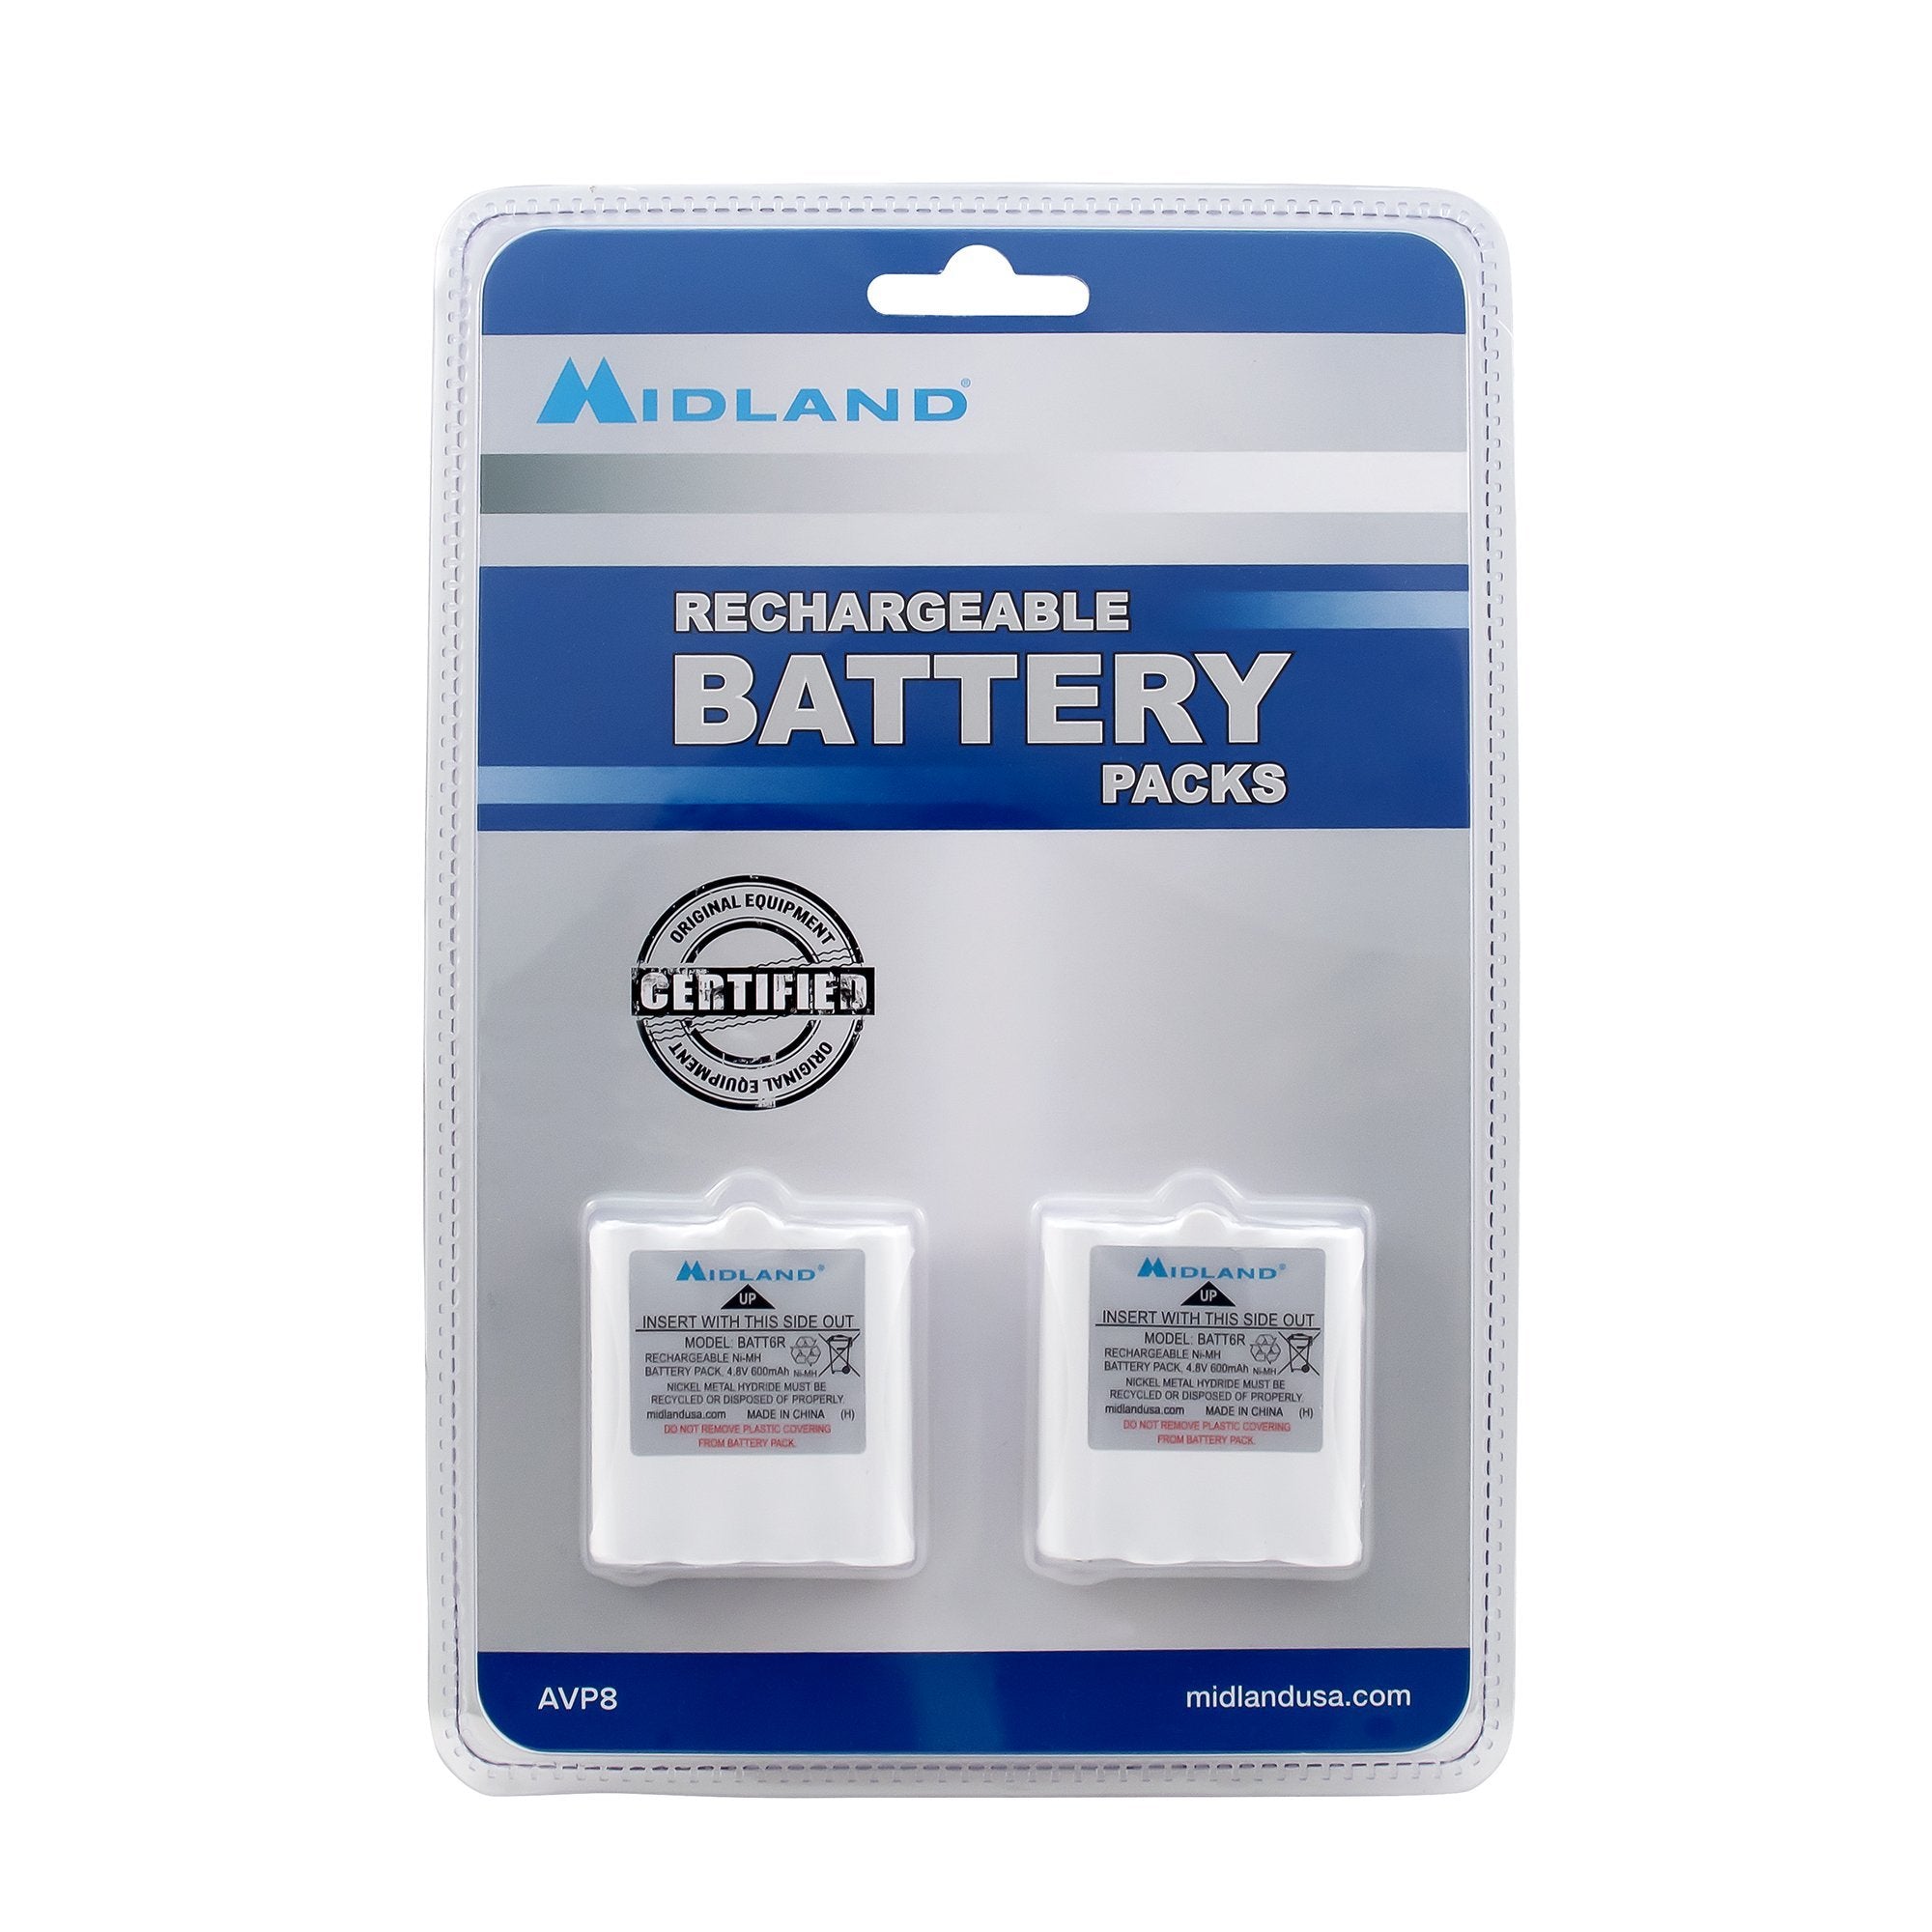 Midland AVP8 Rechargeable Battery Packs